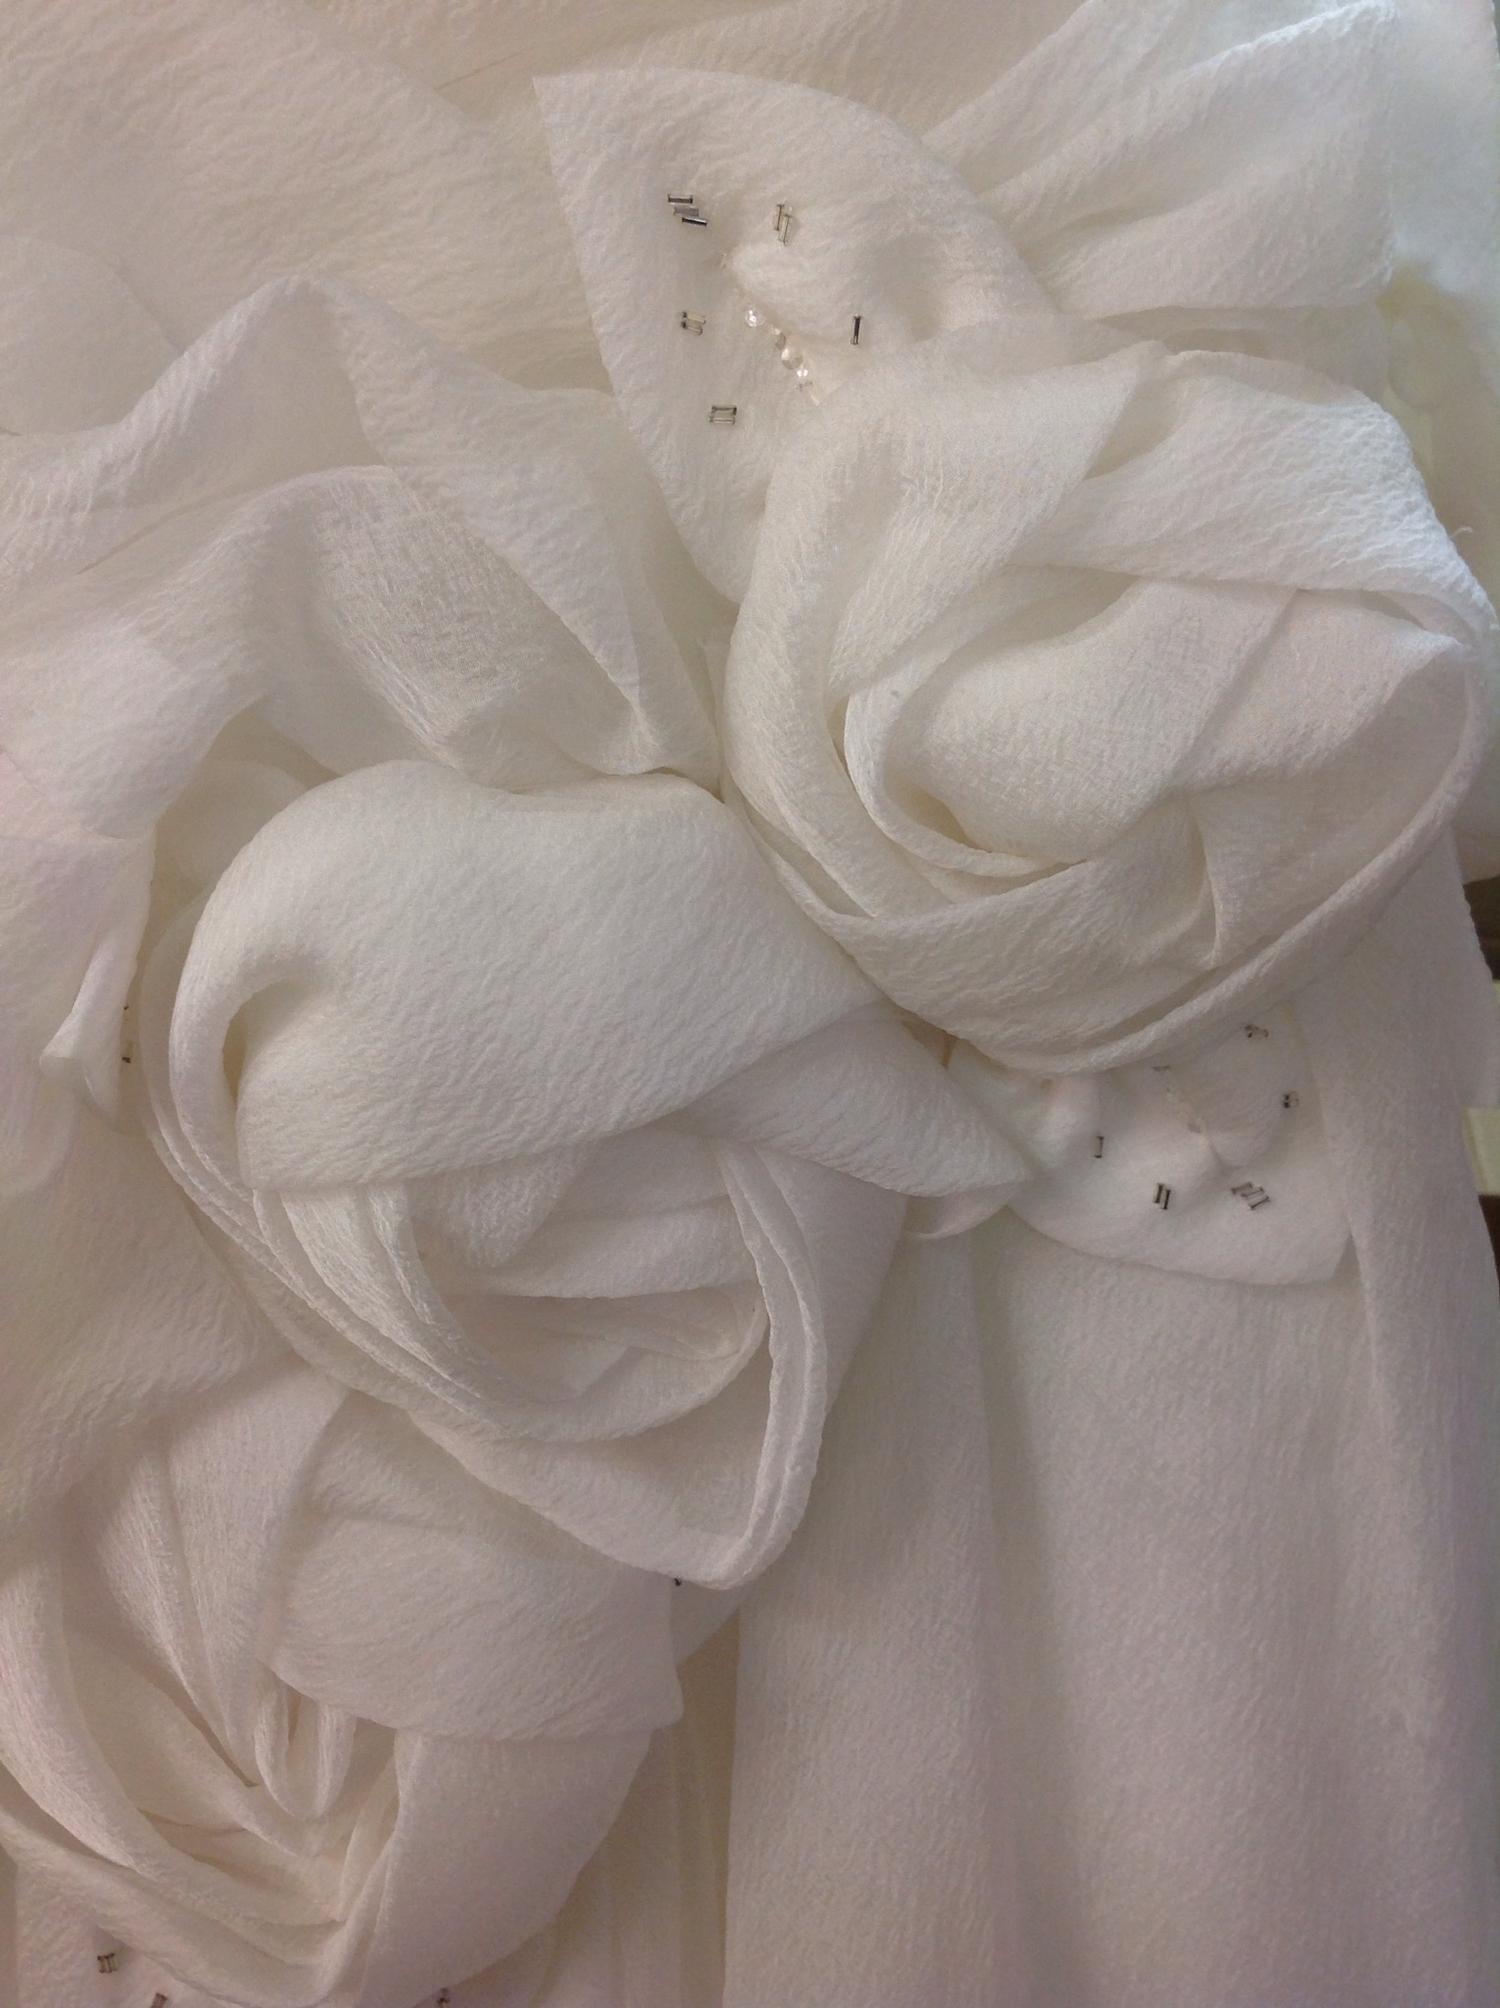 Wedding gown box 1, 6 Wedding gown samples -Total rrp £4156, 4x Ronald Joyce, 2x Lilly Des - Image 11 of 12